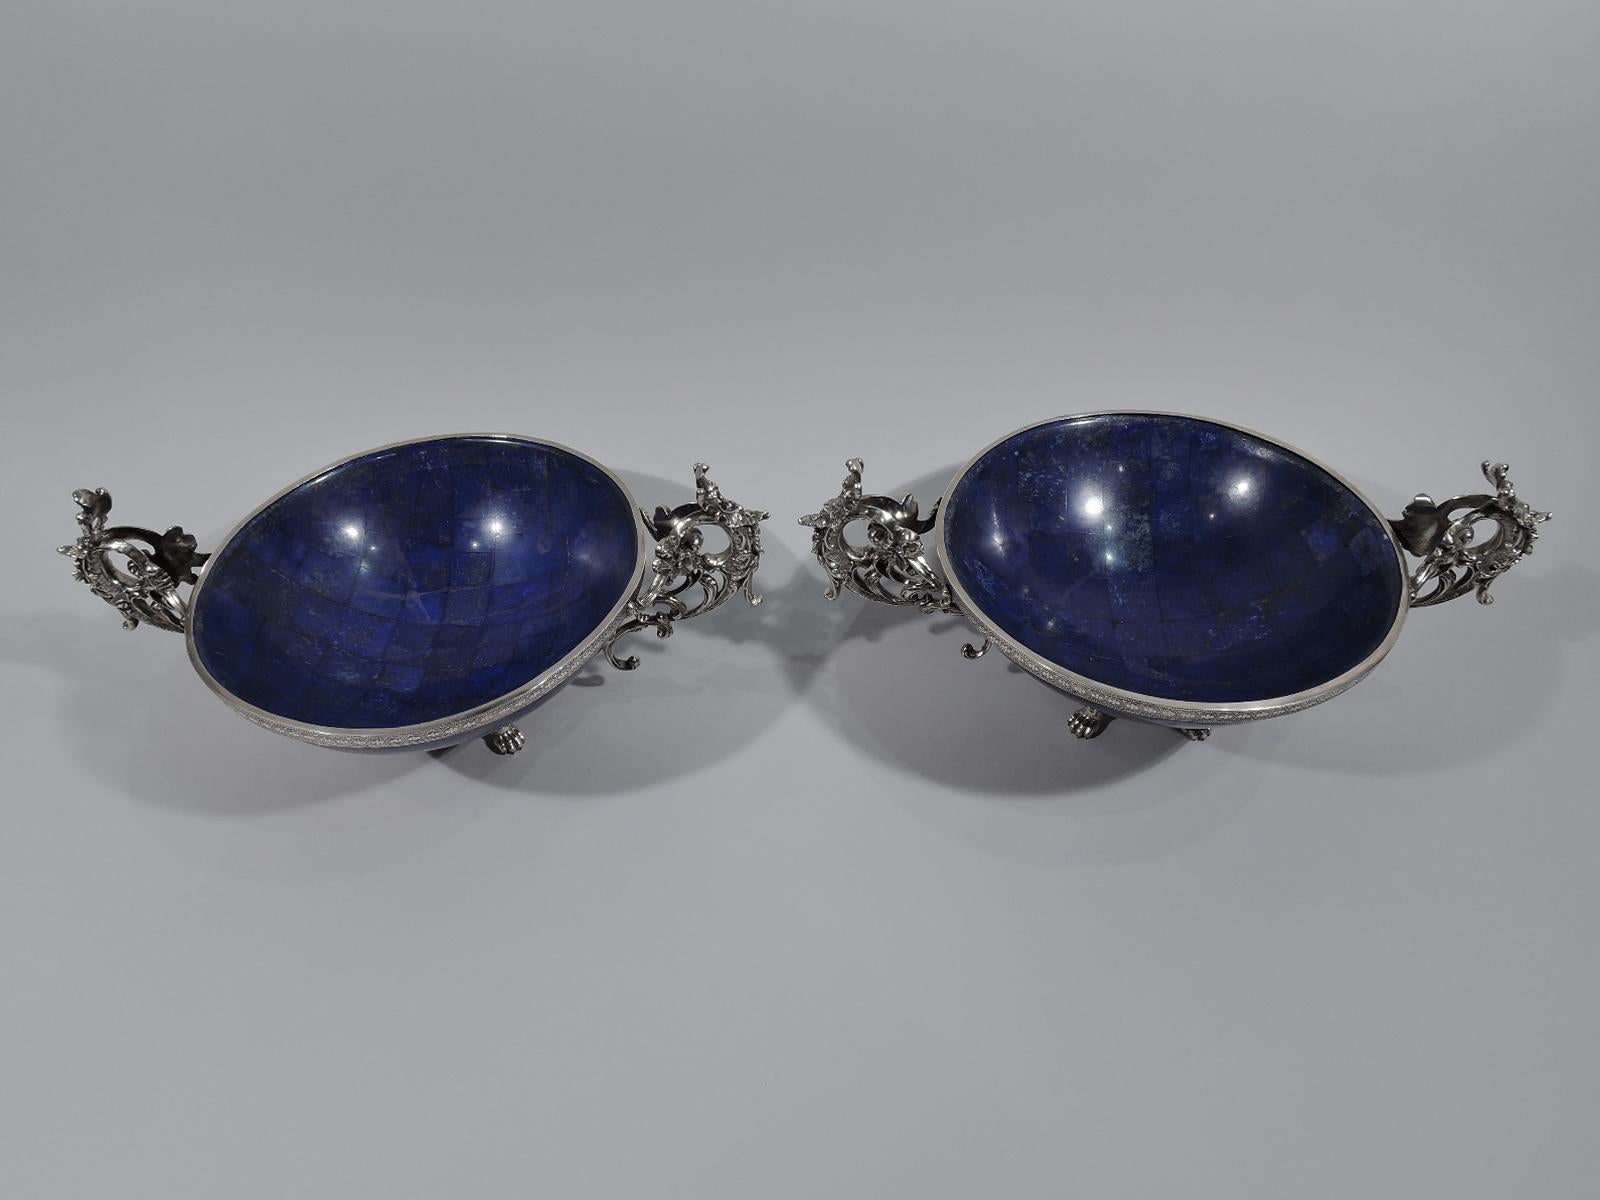 French Pair of Puiforcat Egyptian Revival Silver and Lapis Lazuli Bowls